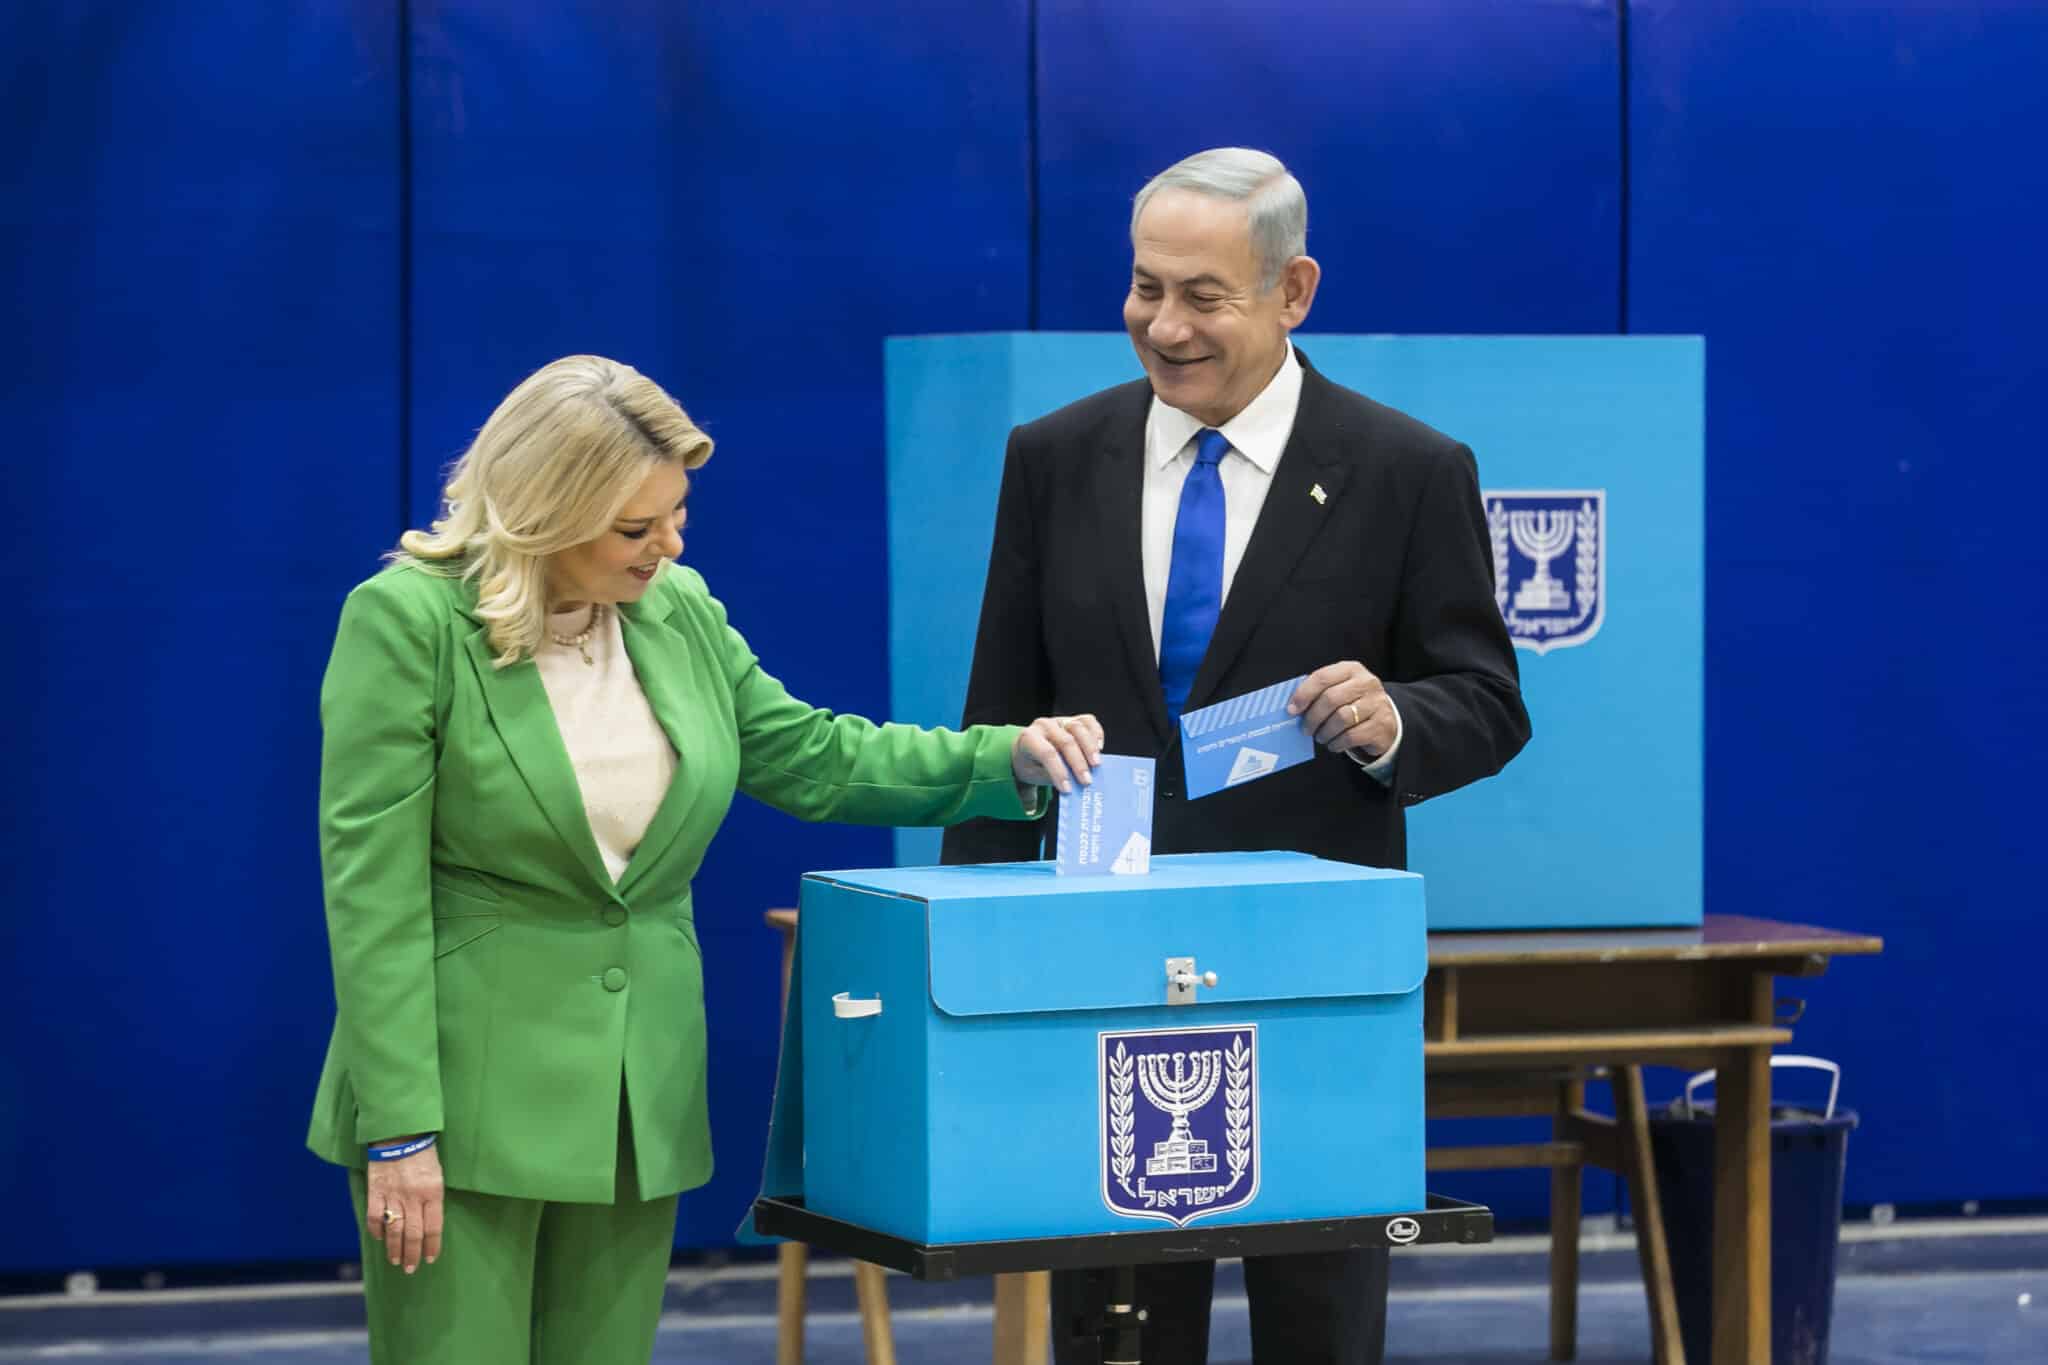 JERUSALEM, ISRAEL - NOVEMBER 01:  Former Israeli Prime Minister and Likud party leader Benjamin Netanyahu and his wife Sara Netanyahu cast their vote in the Israeli general election on November 1, 2022 in UNSPECIFIED, Israel. Israelis return to the polls on November 1 for a fifth general election in four years to vote for a new Knesset, the 120-seat parliament.  (Photo by Amir Levy/Getty Images)